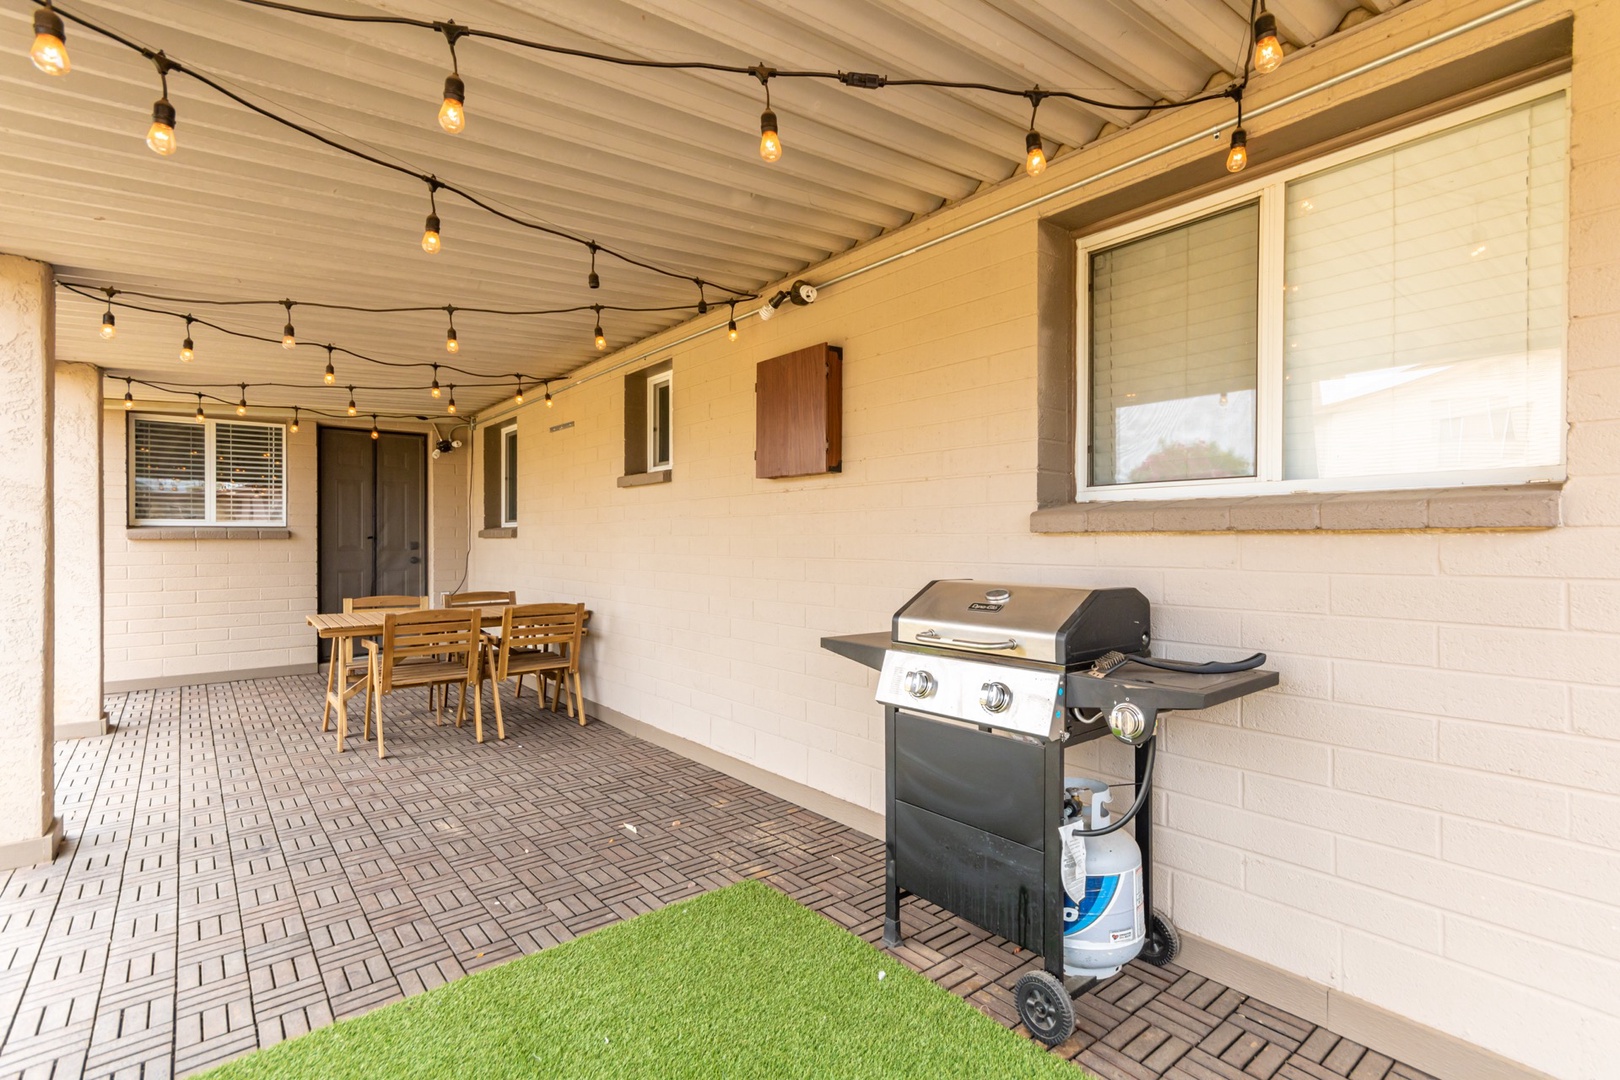 Patio with table and BBQ Grill